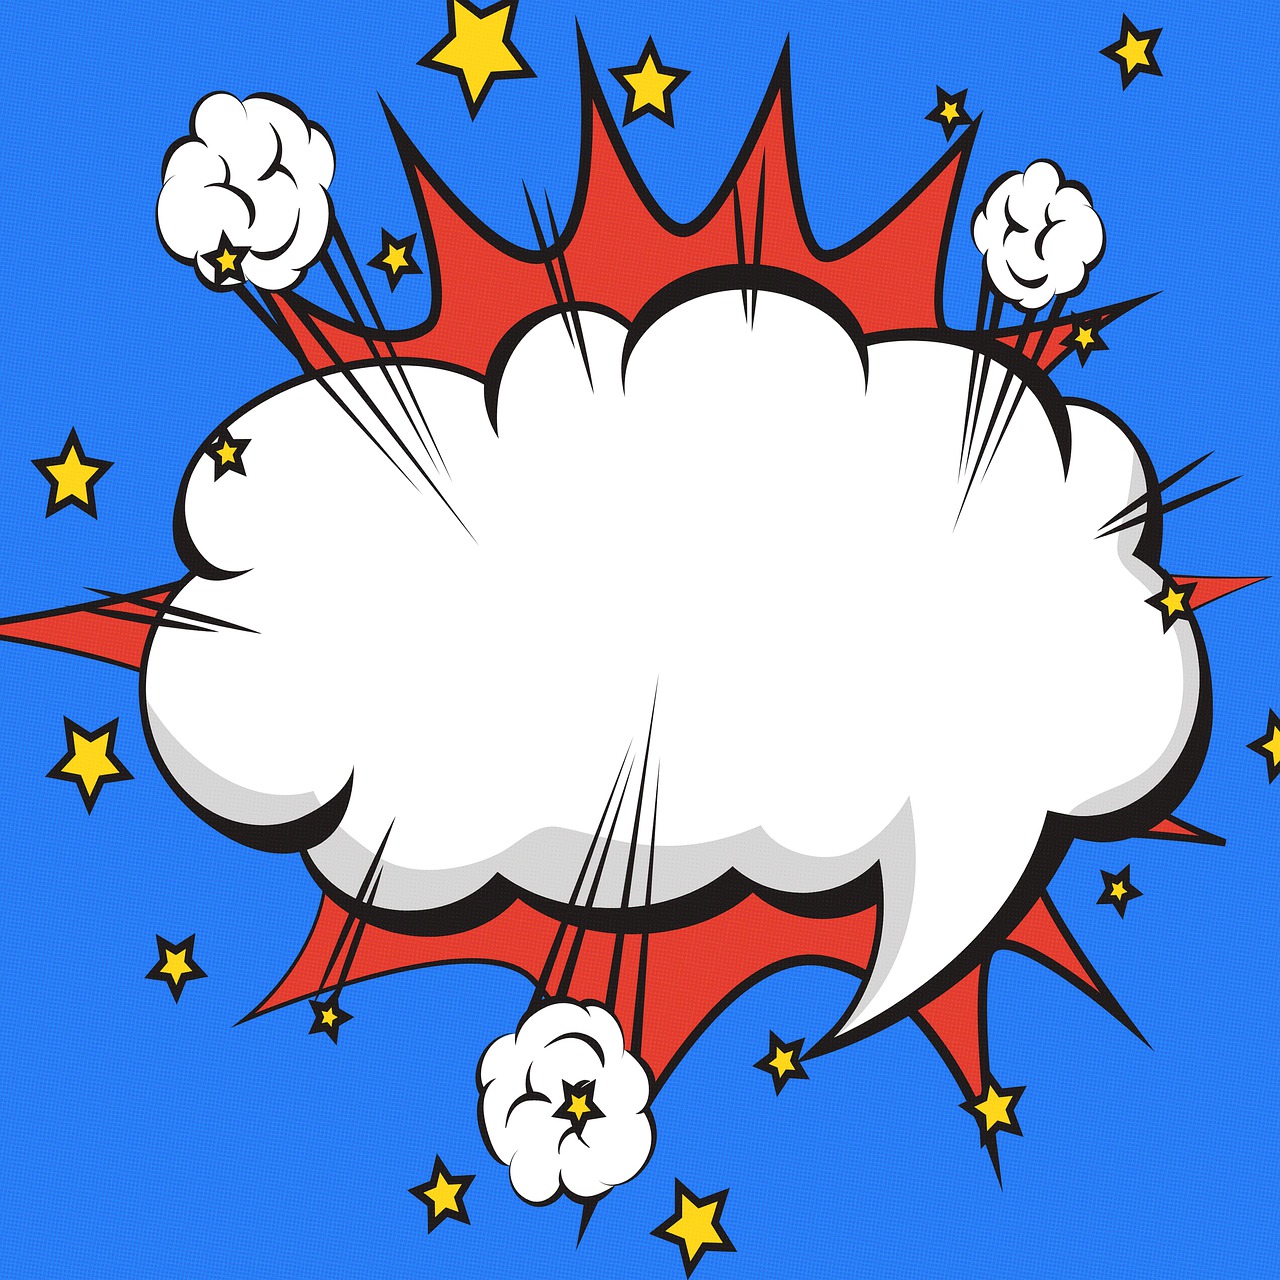 a comic speech bubble with stars on a blue background, a comic book panel, pop art, huge explosions, white cloud, frame, mid century modern cartoon style